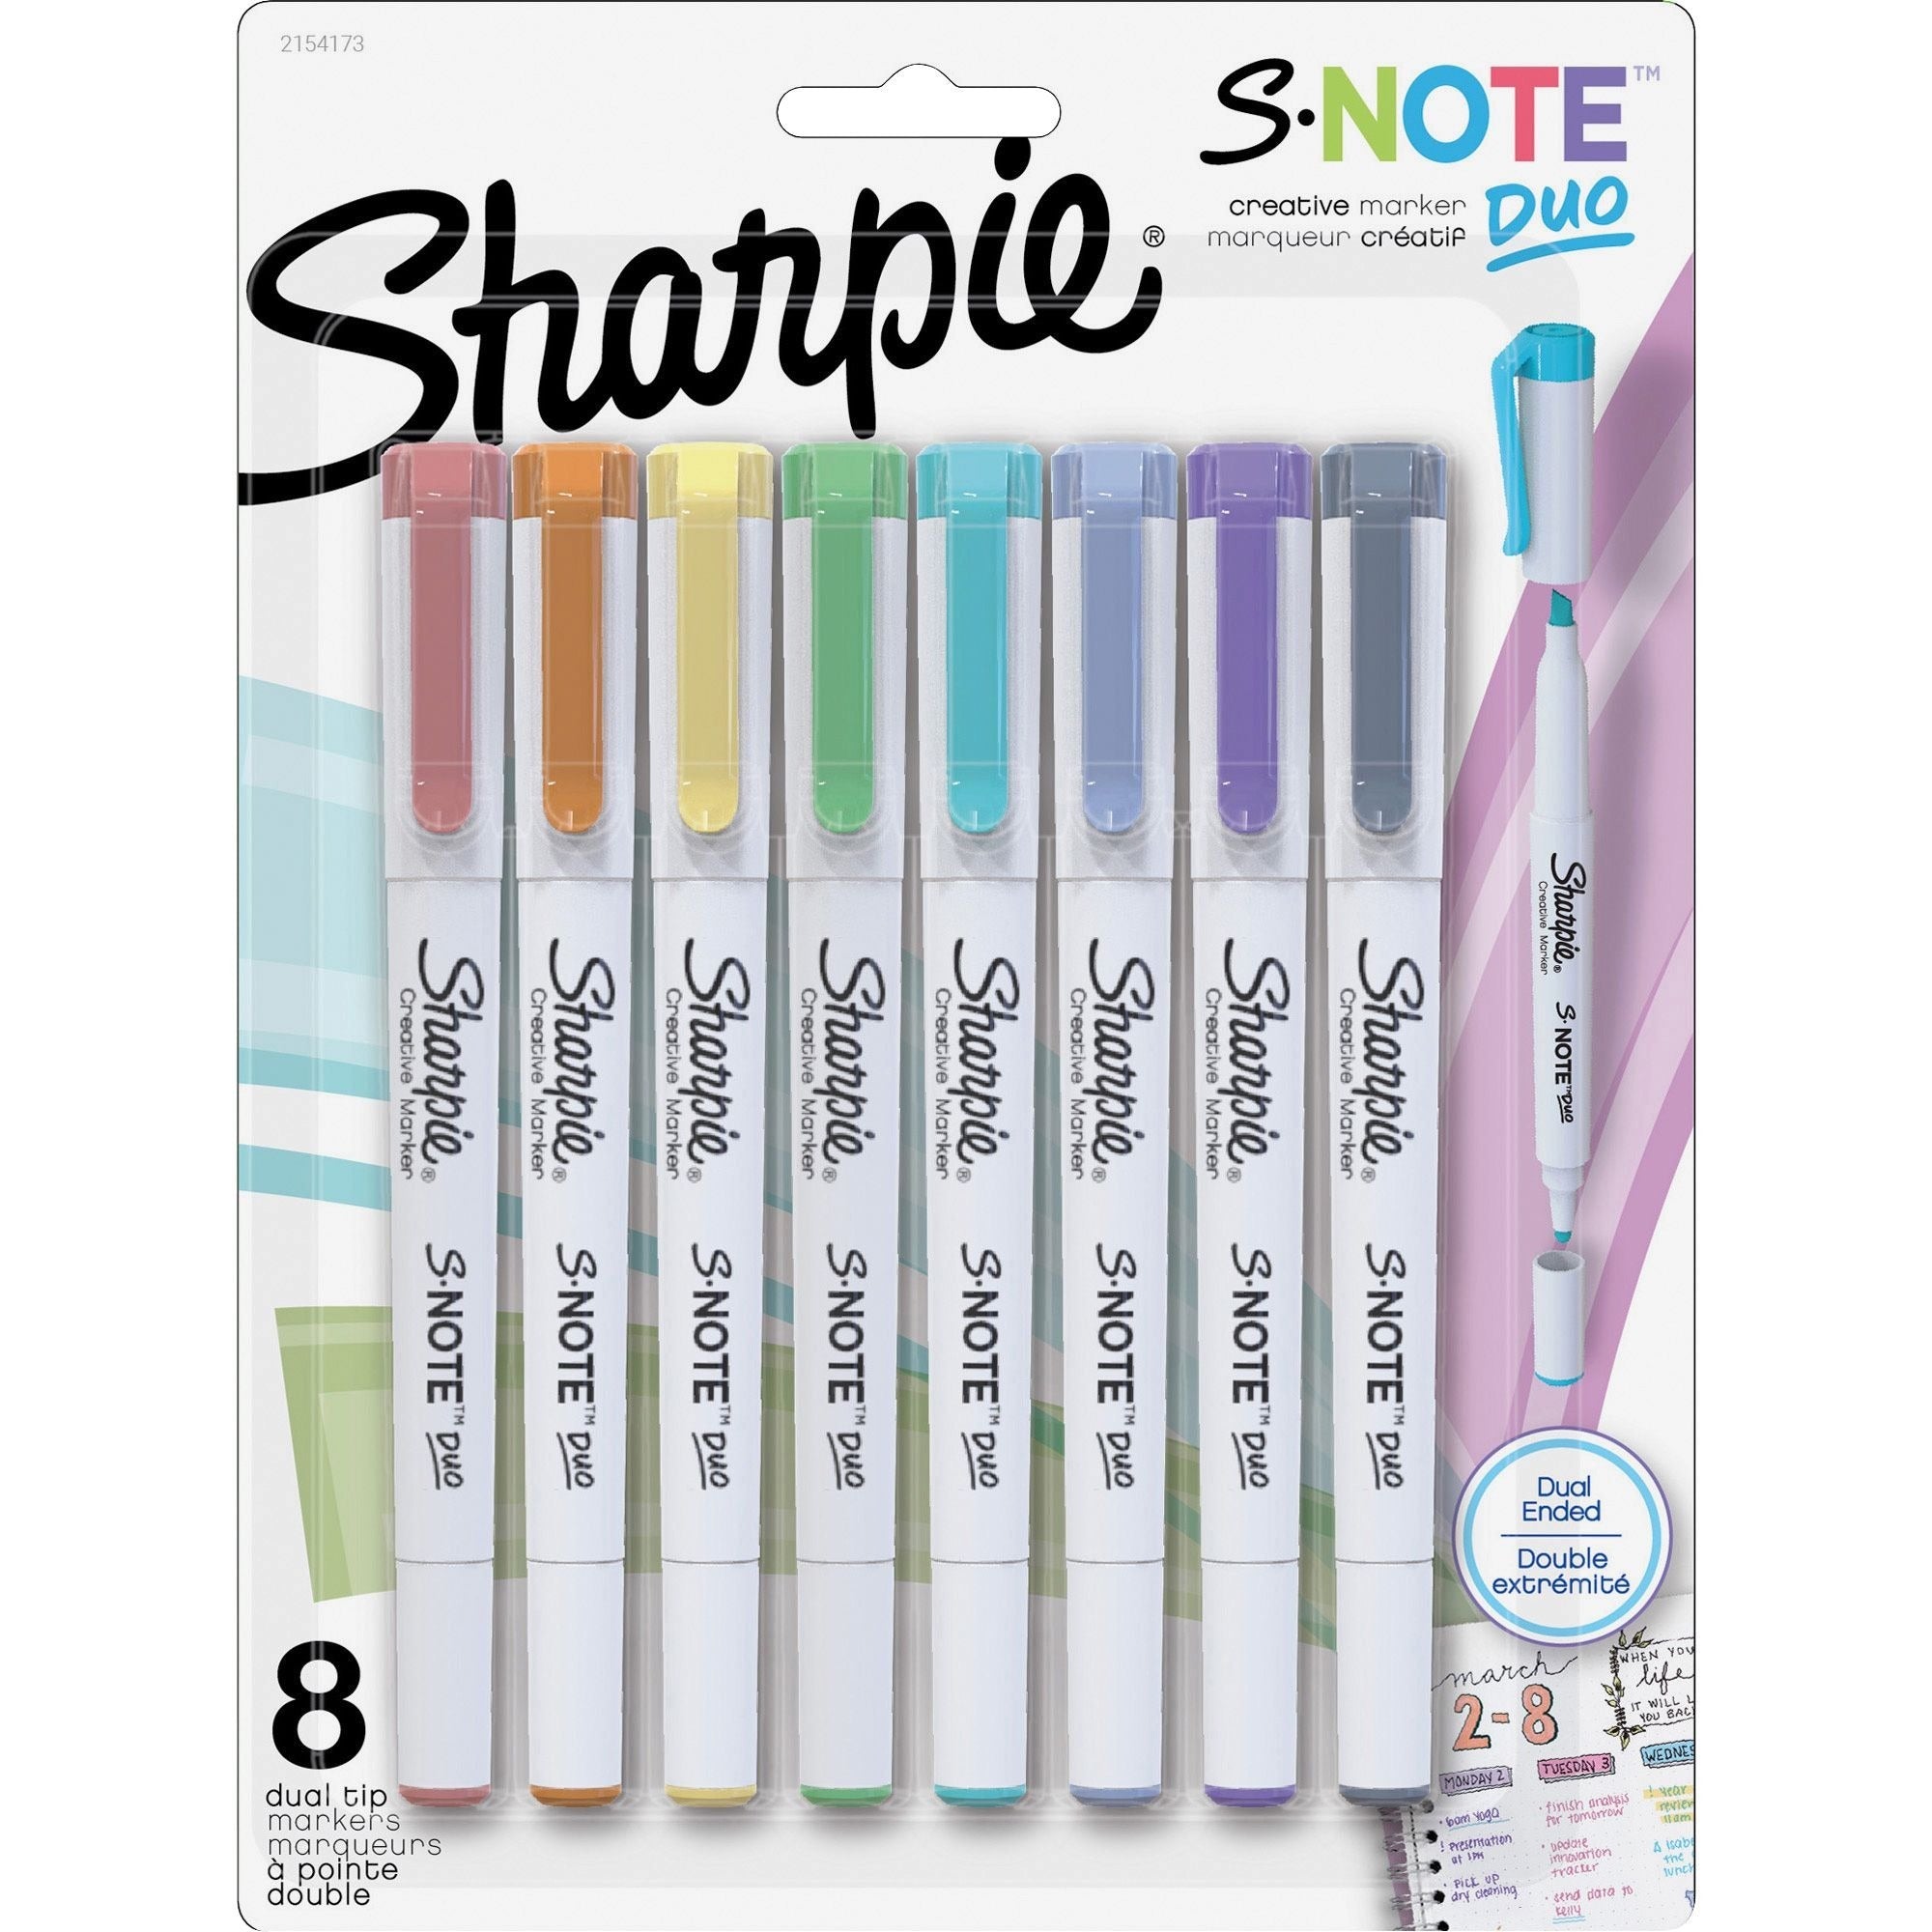 sharpie-s-note-duo-dual-tip-markers-chisel-bullet-marker-point-style-assorted-6-box_san2154173bx - 2